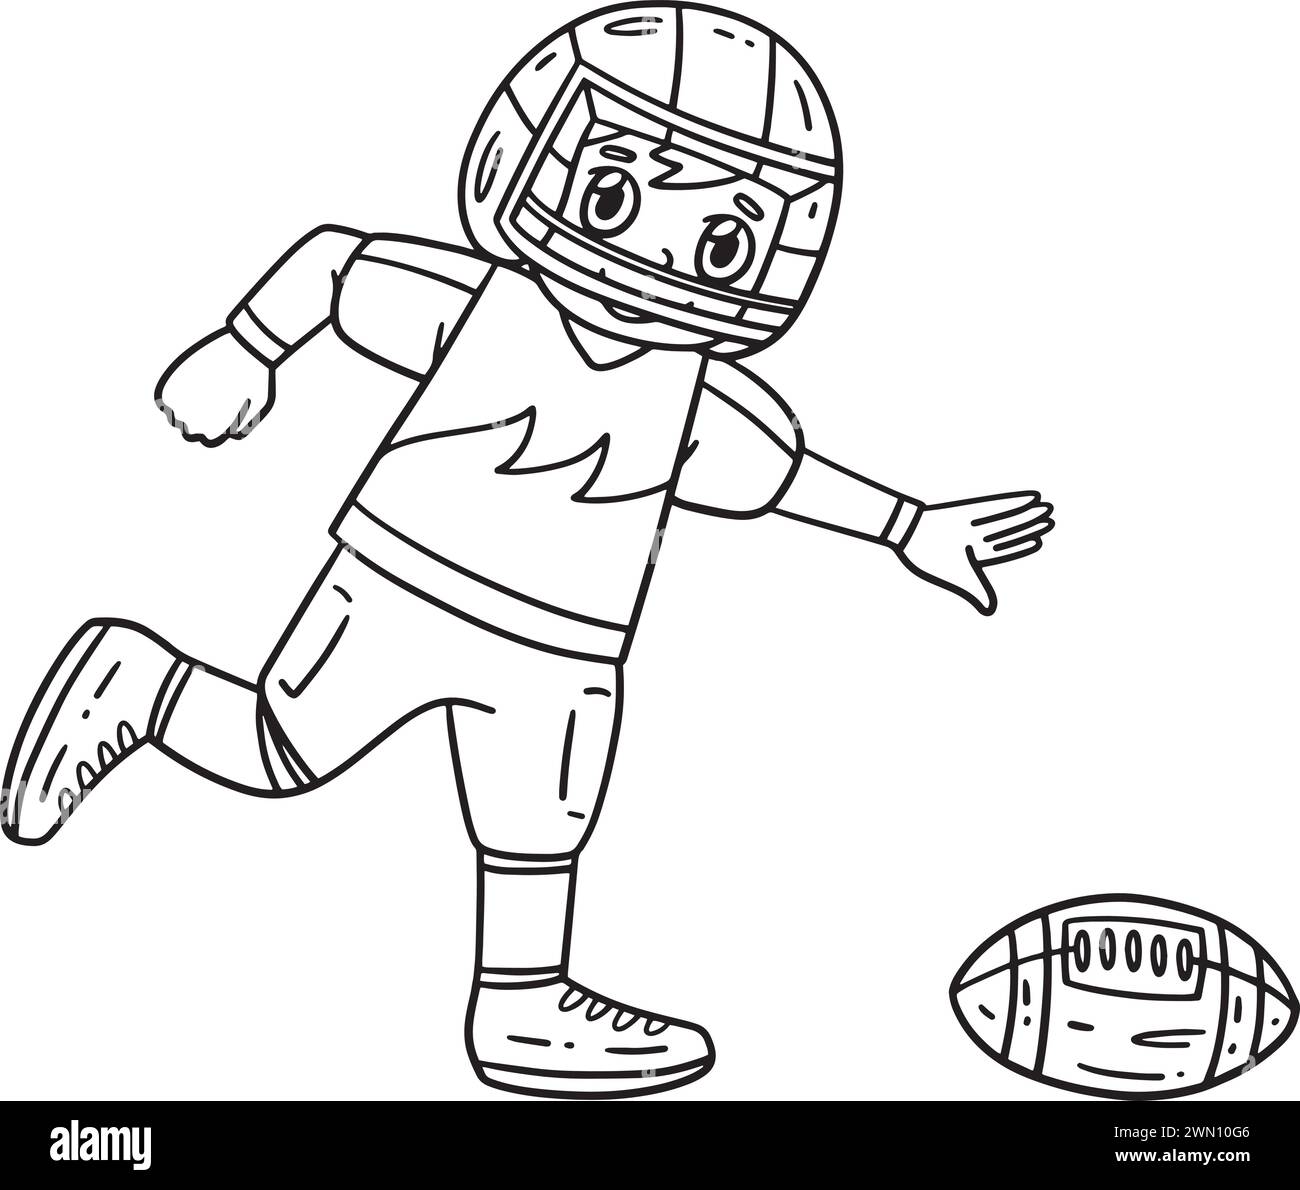 American Player Chasing Football Isolated Coloring Stock Vector